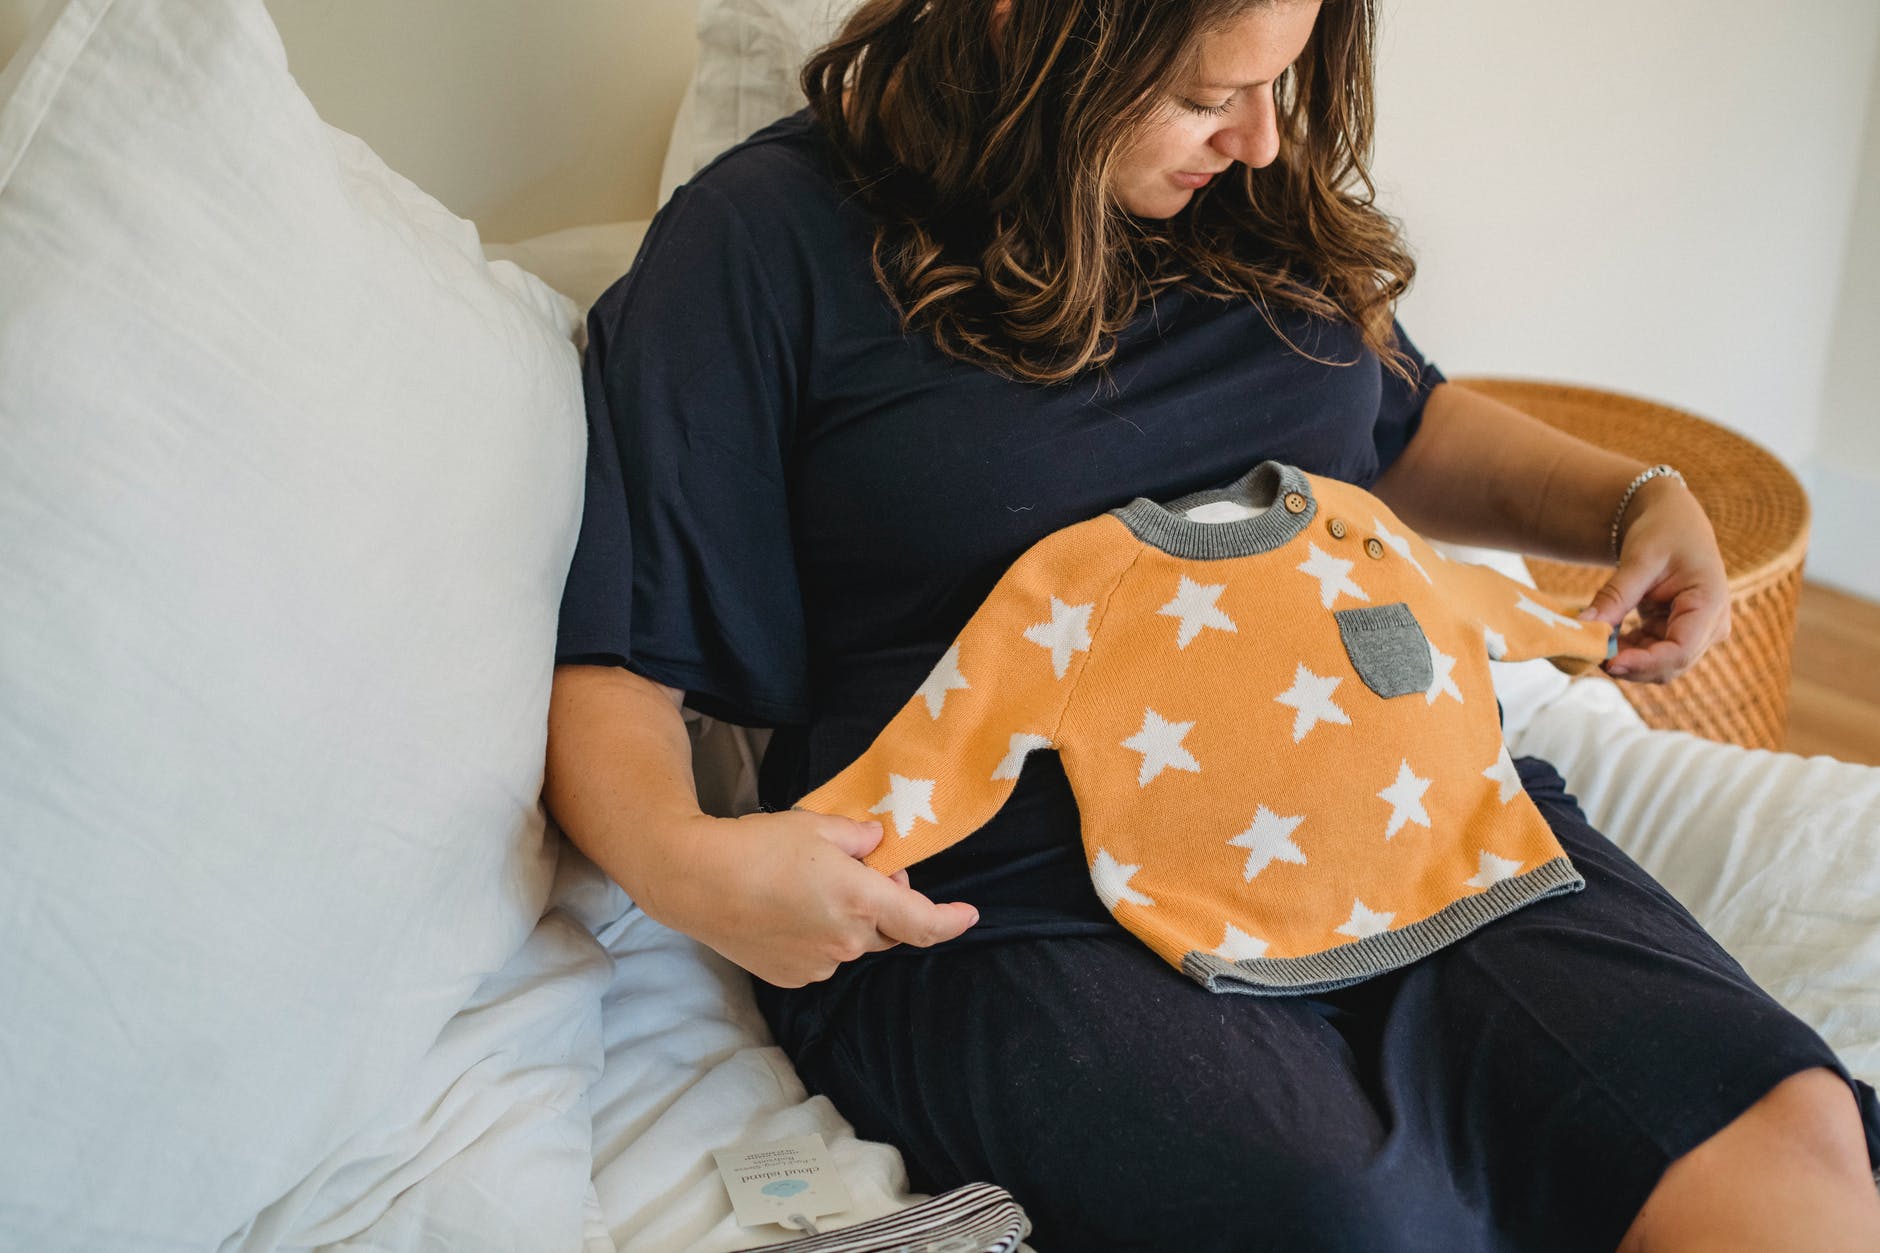 crop expectant woman with baby wear on bed in house